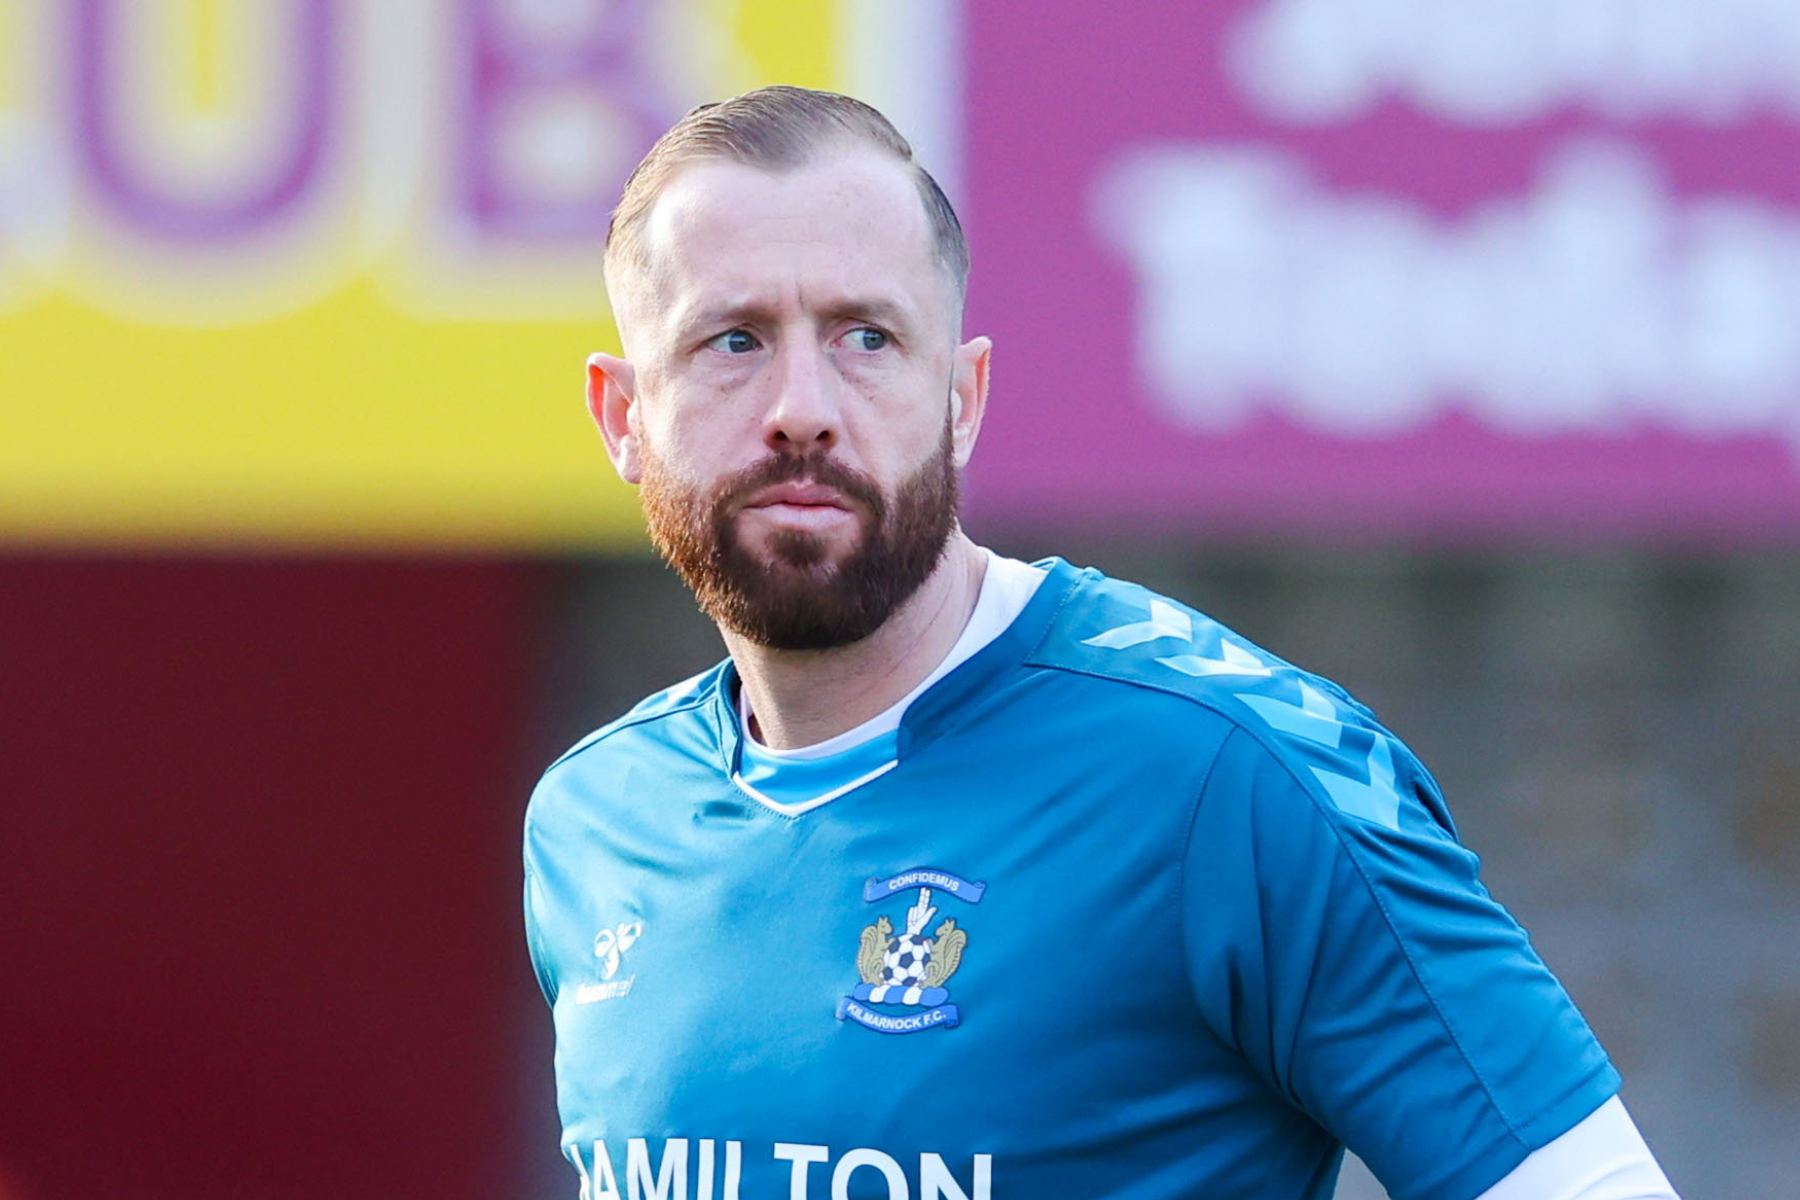 Kilmarnock win the January window with top-drawer signings